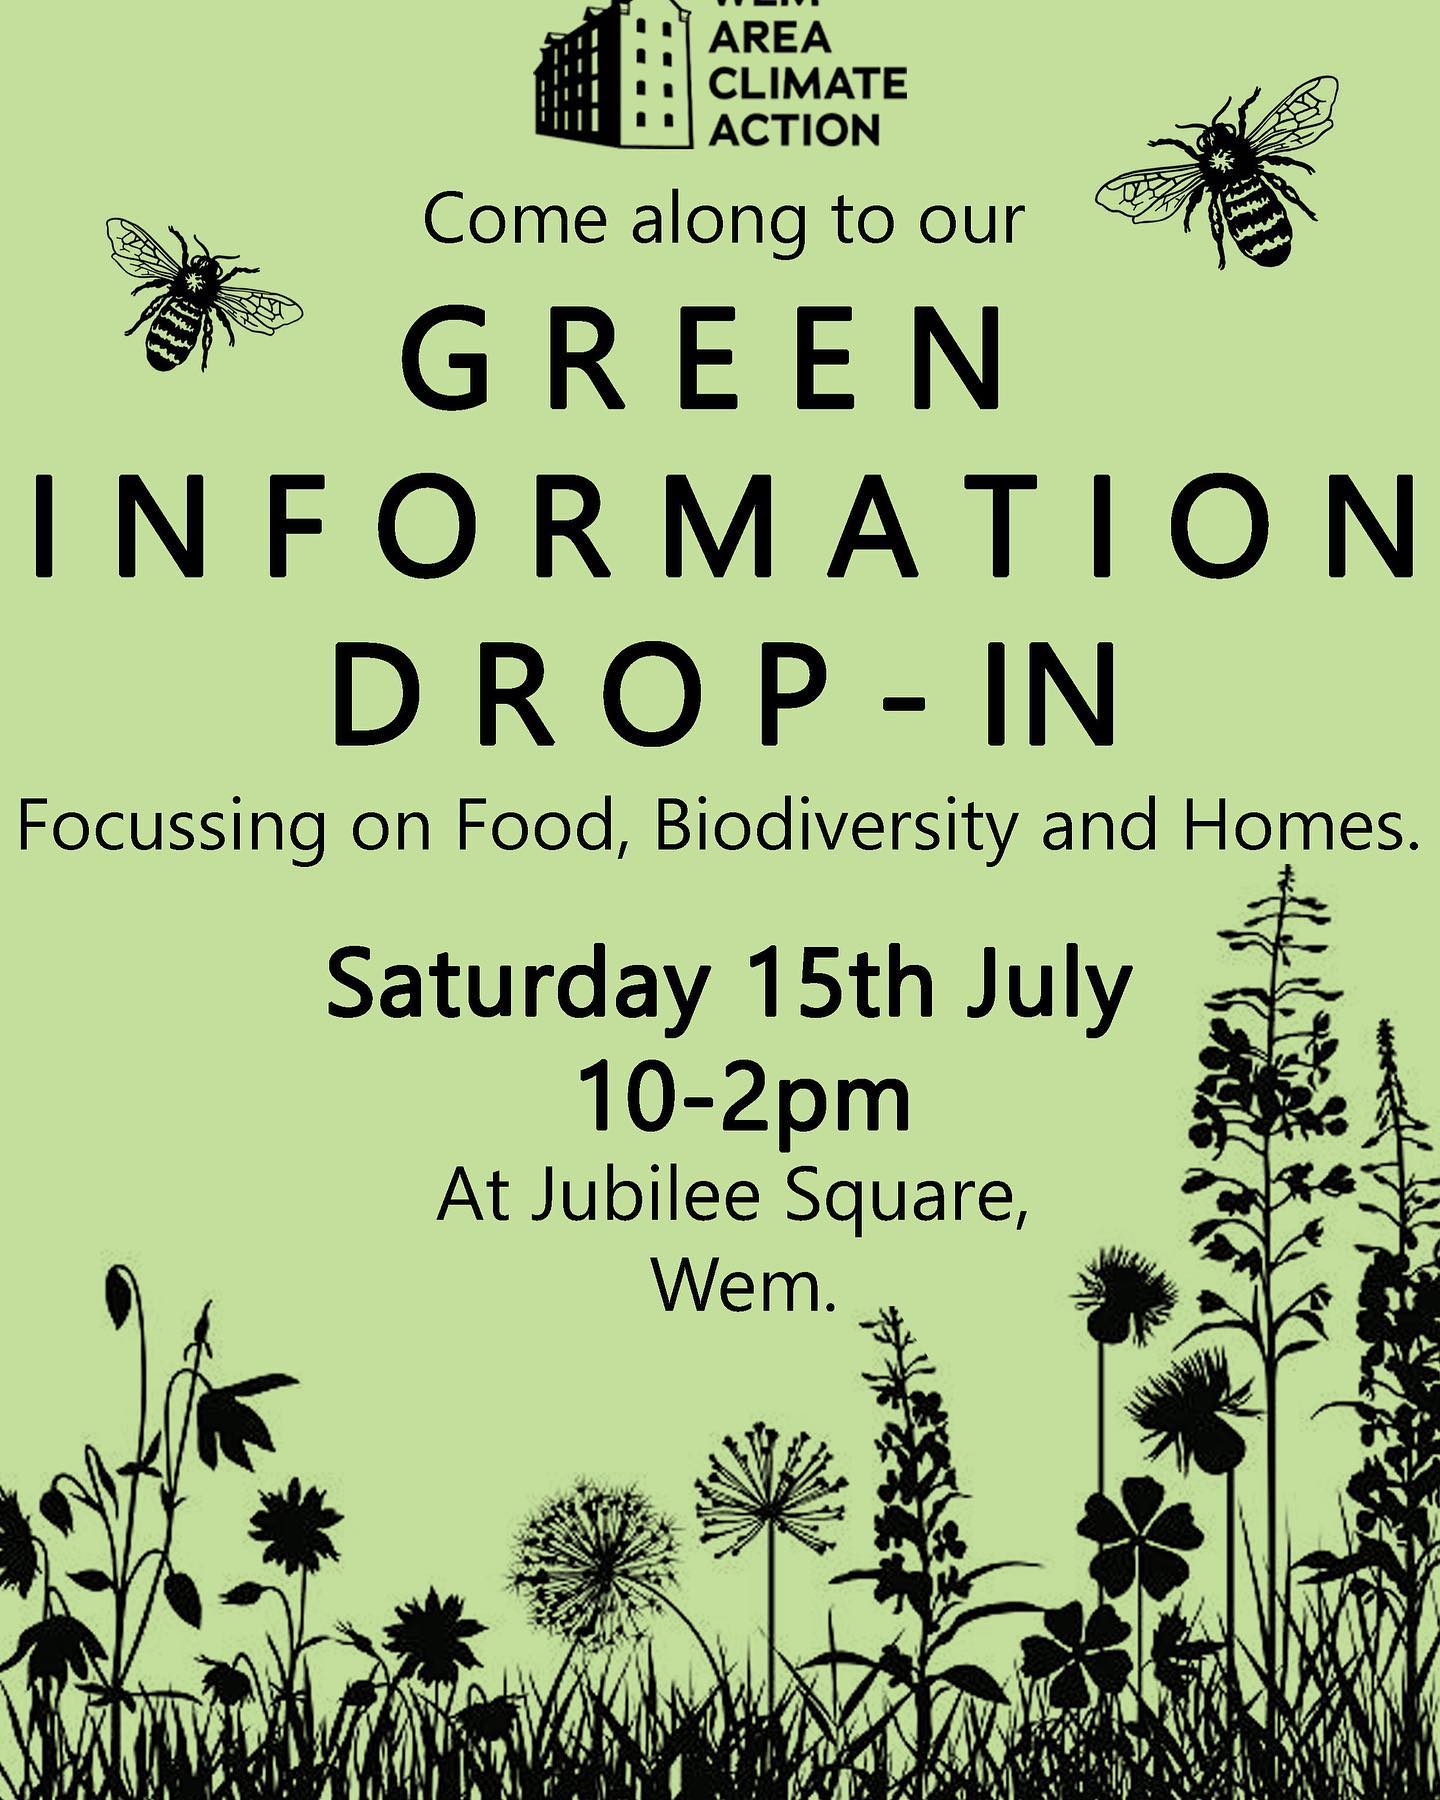 Lots of information on being “Green” and buying local produce in Wem on 15th July – save the date